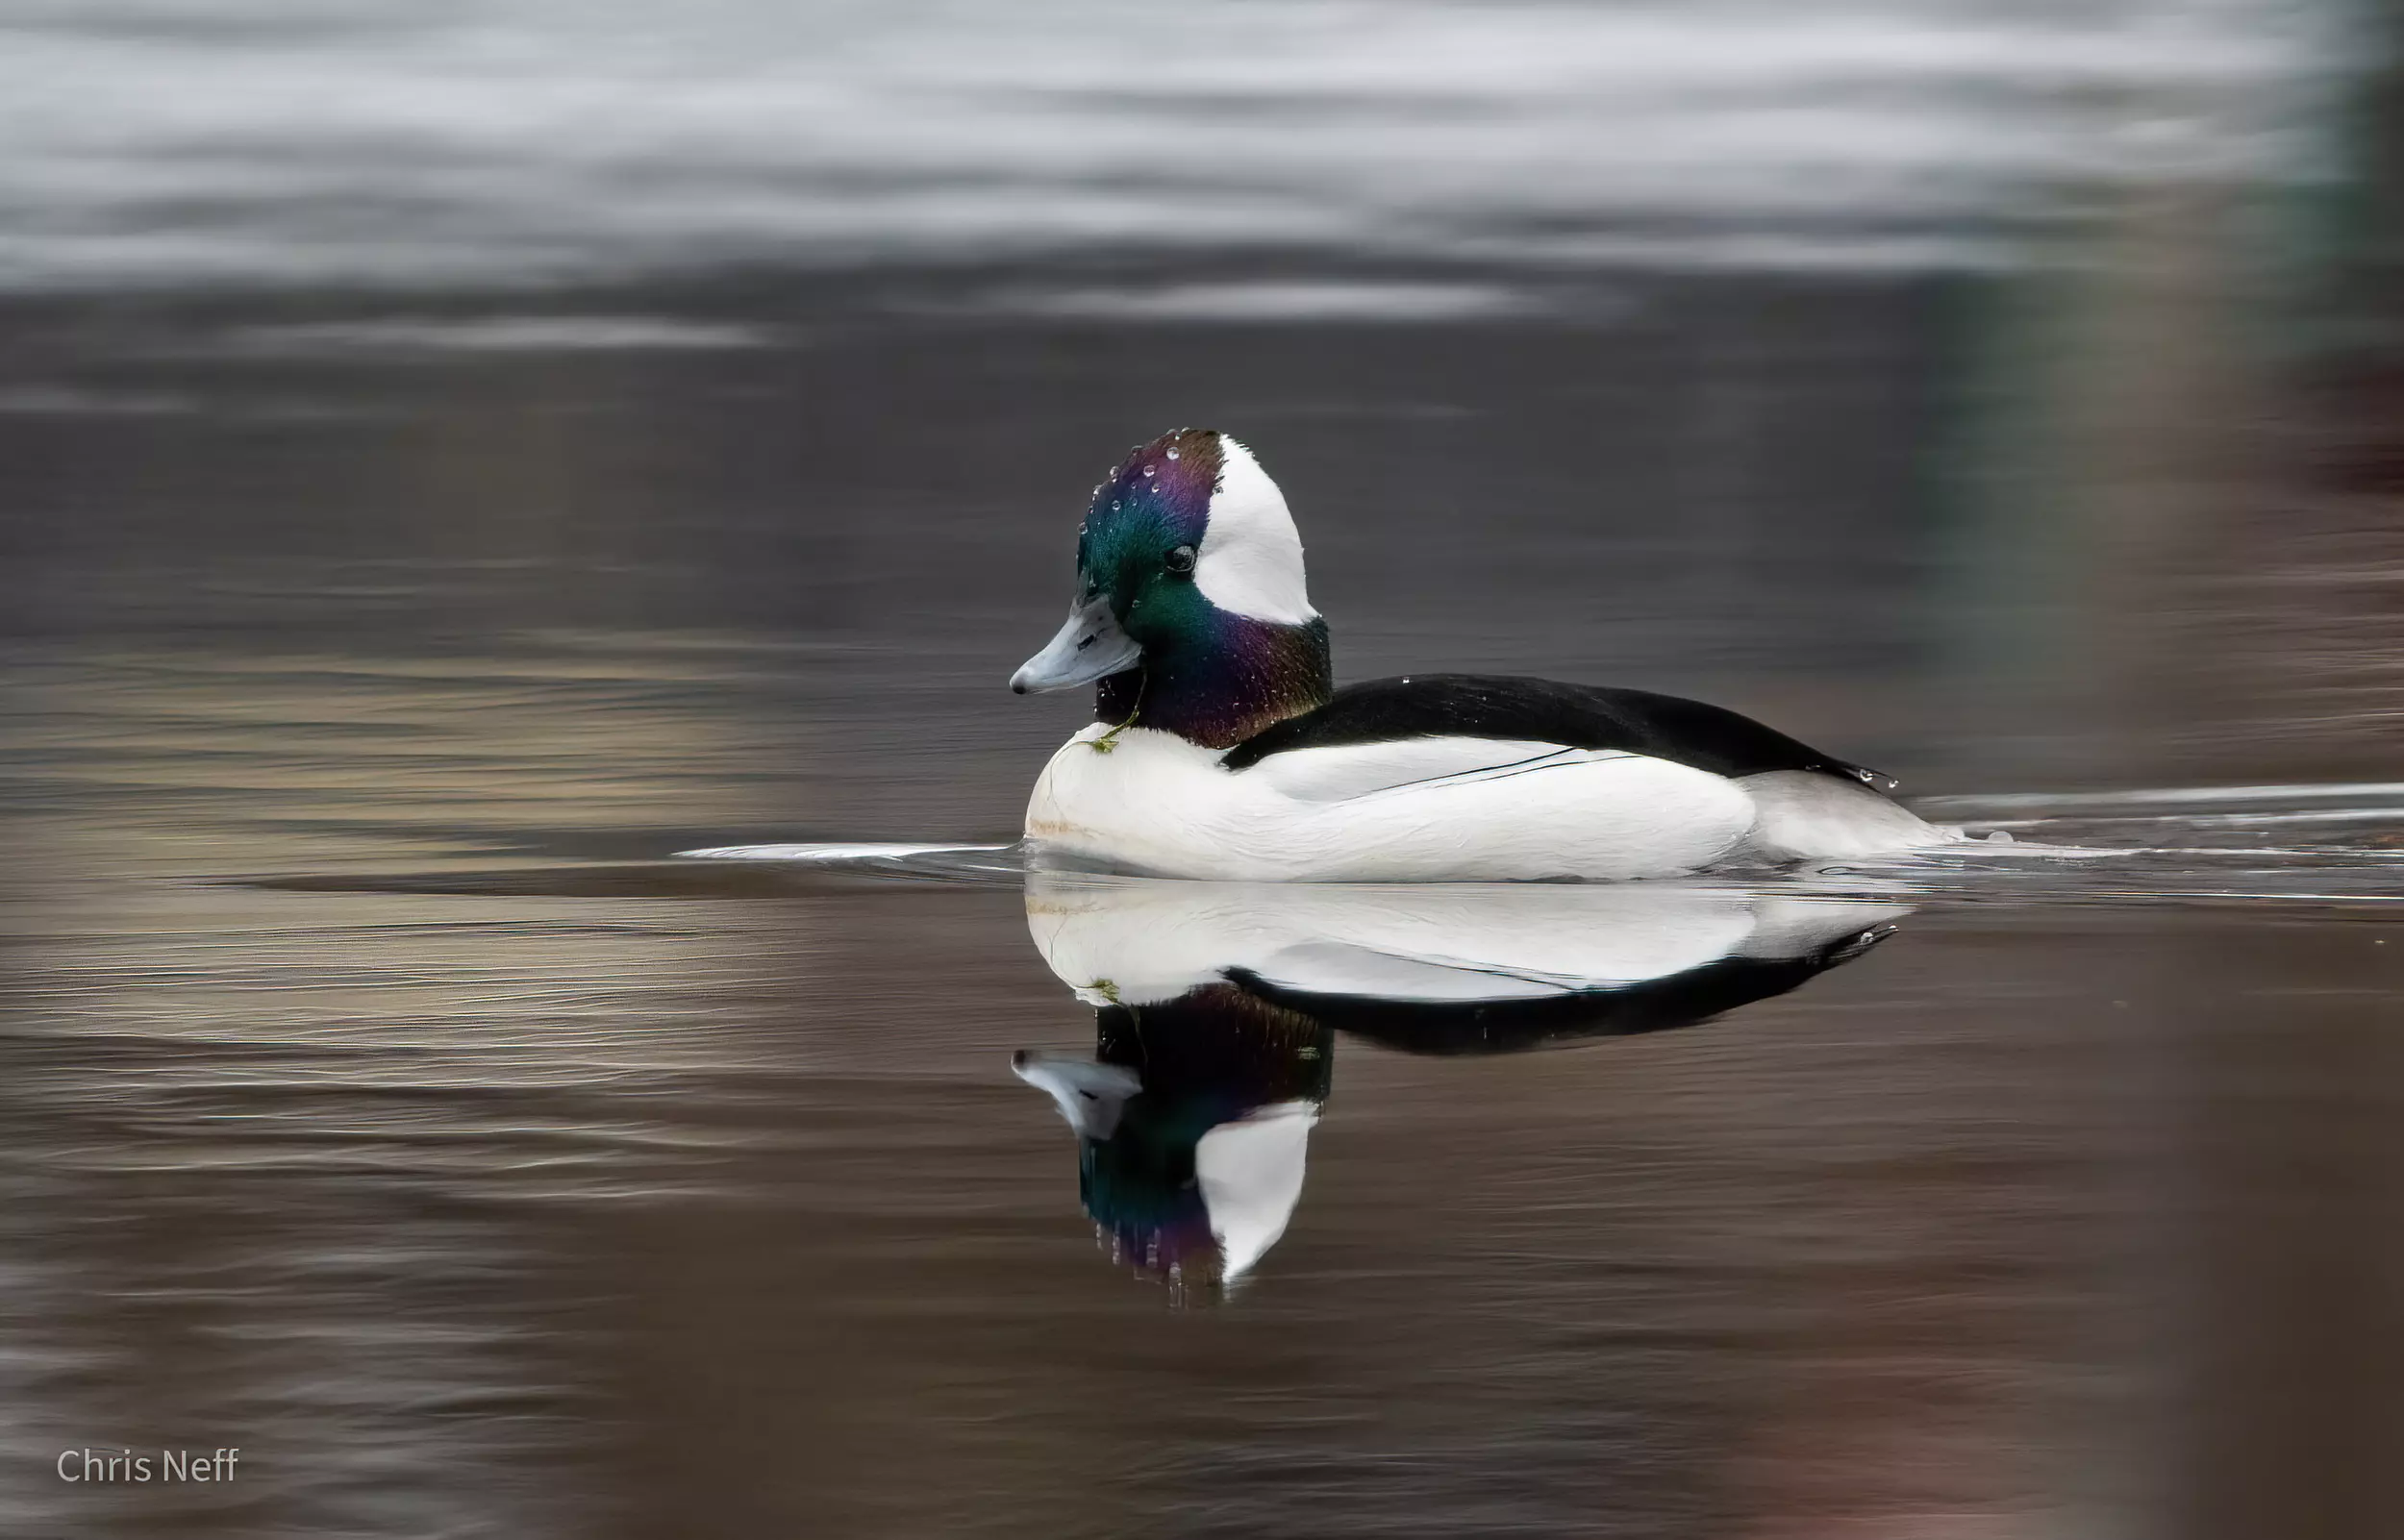 One of the most unique and spectacular winter ducks in NJ